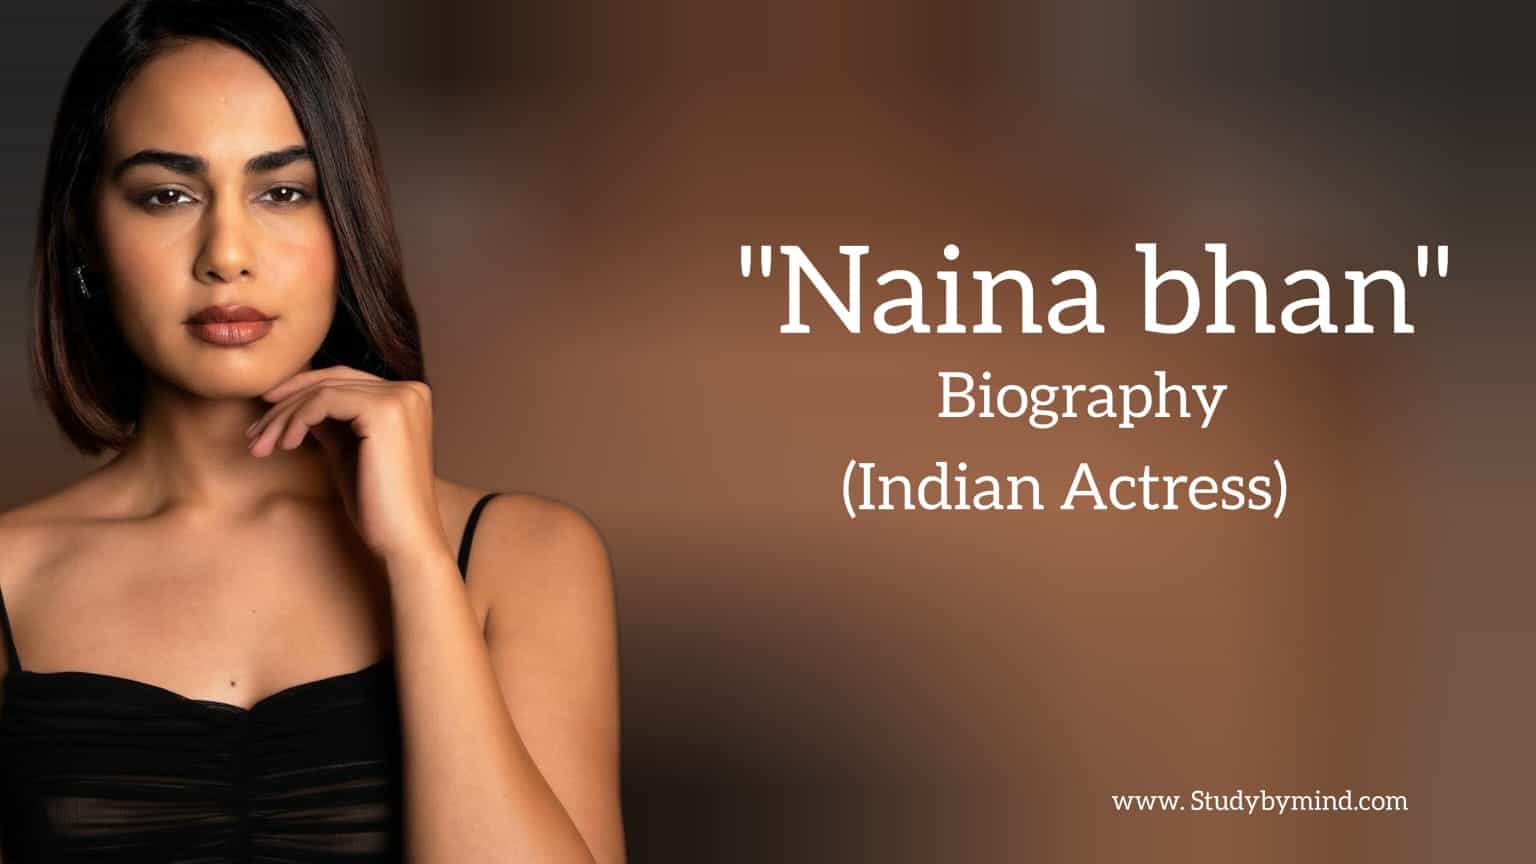 You are currently viewing Naina bhan biography in english (Indian actress)